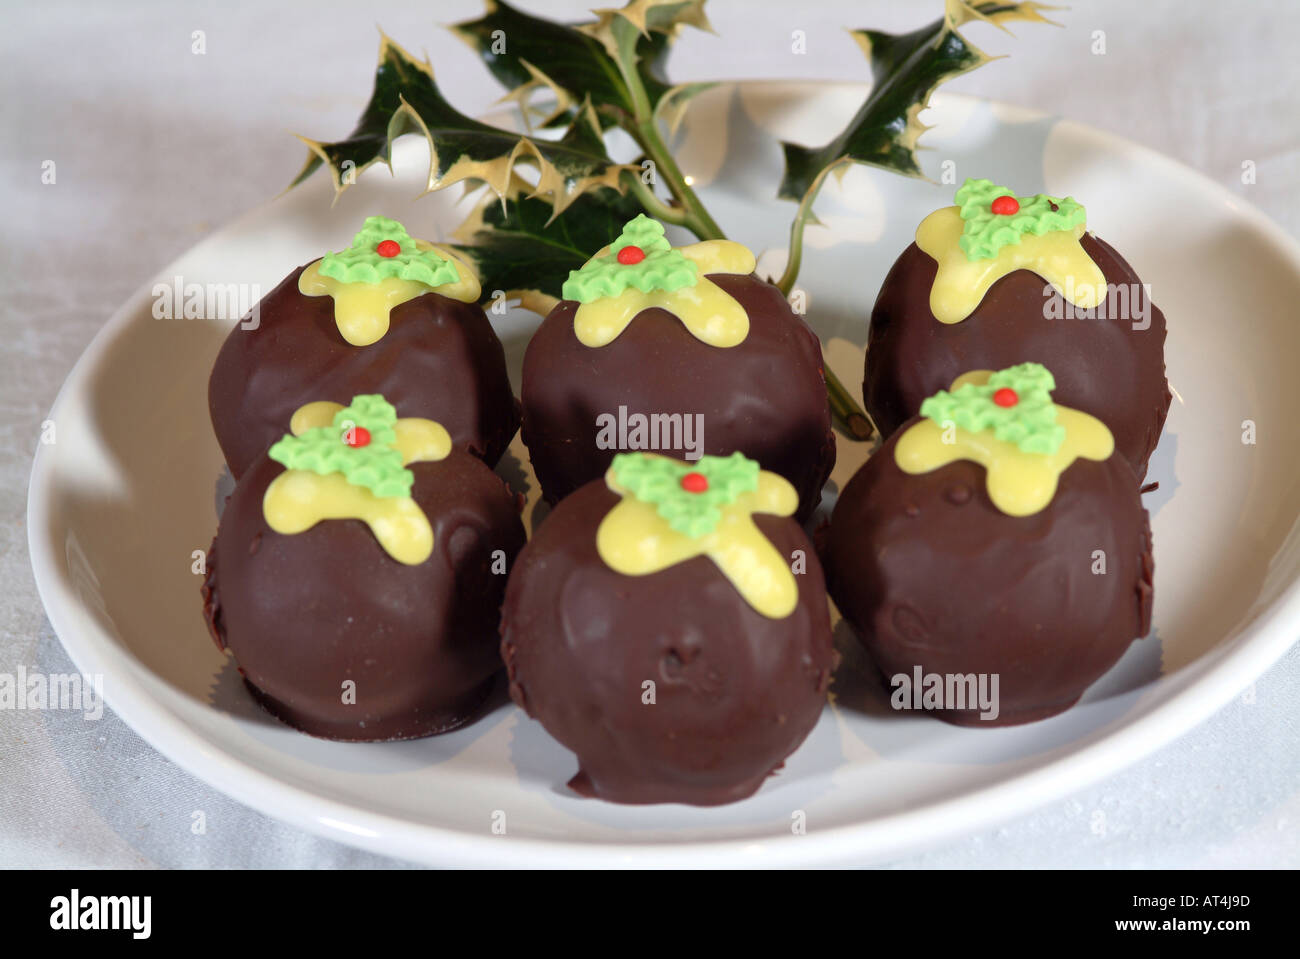 Chocolate Fancy Cakes Shaped Like Christmas Puddings on a White Plate with Holly Sprig Stock Photo